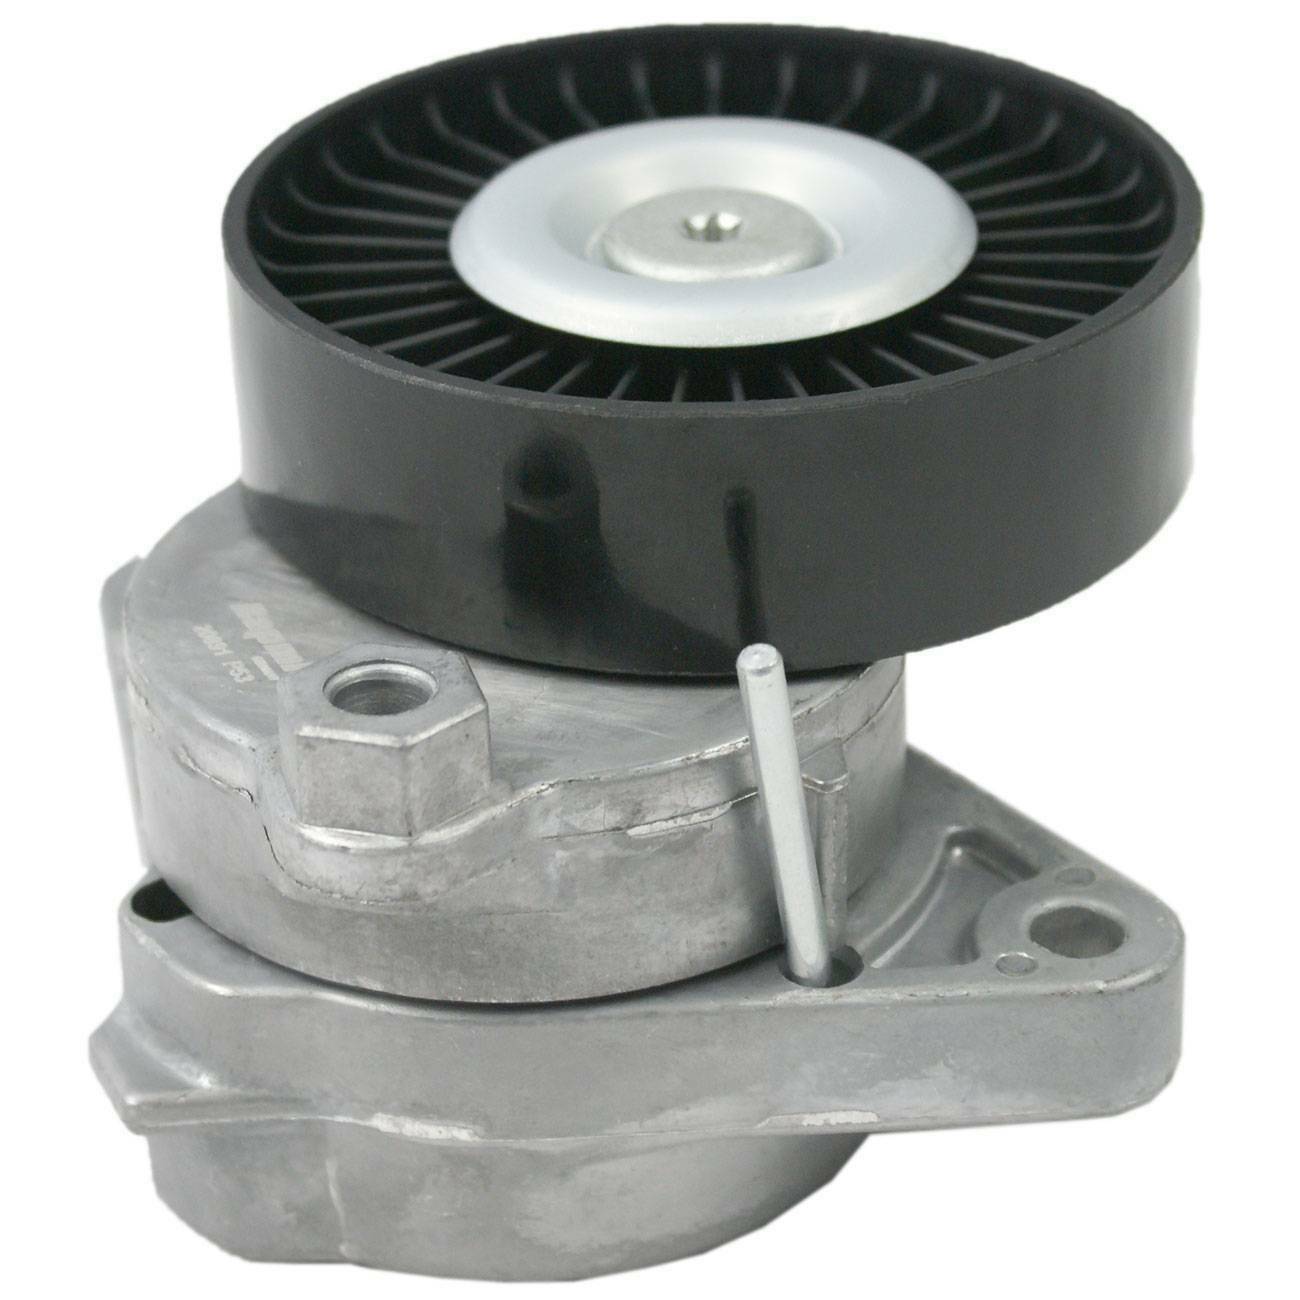 Bapmic Serpentine Belt Tensioner with Pulley Assembly Compatible with Mercedes Benz W203 W211 W220 W163 W164 1122000970 